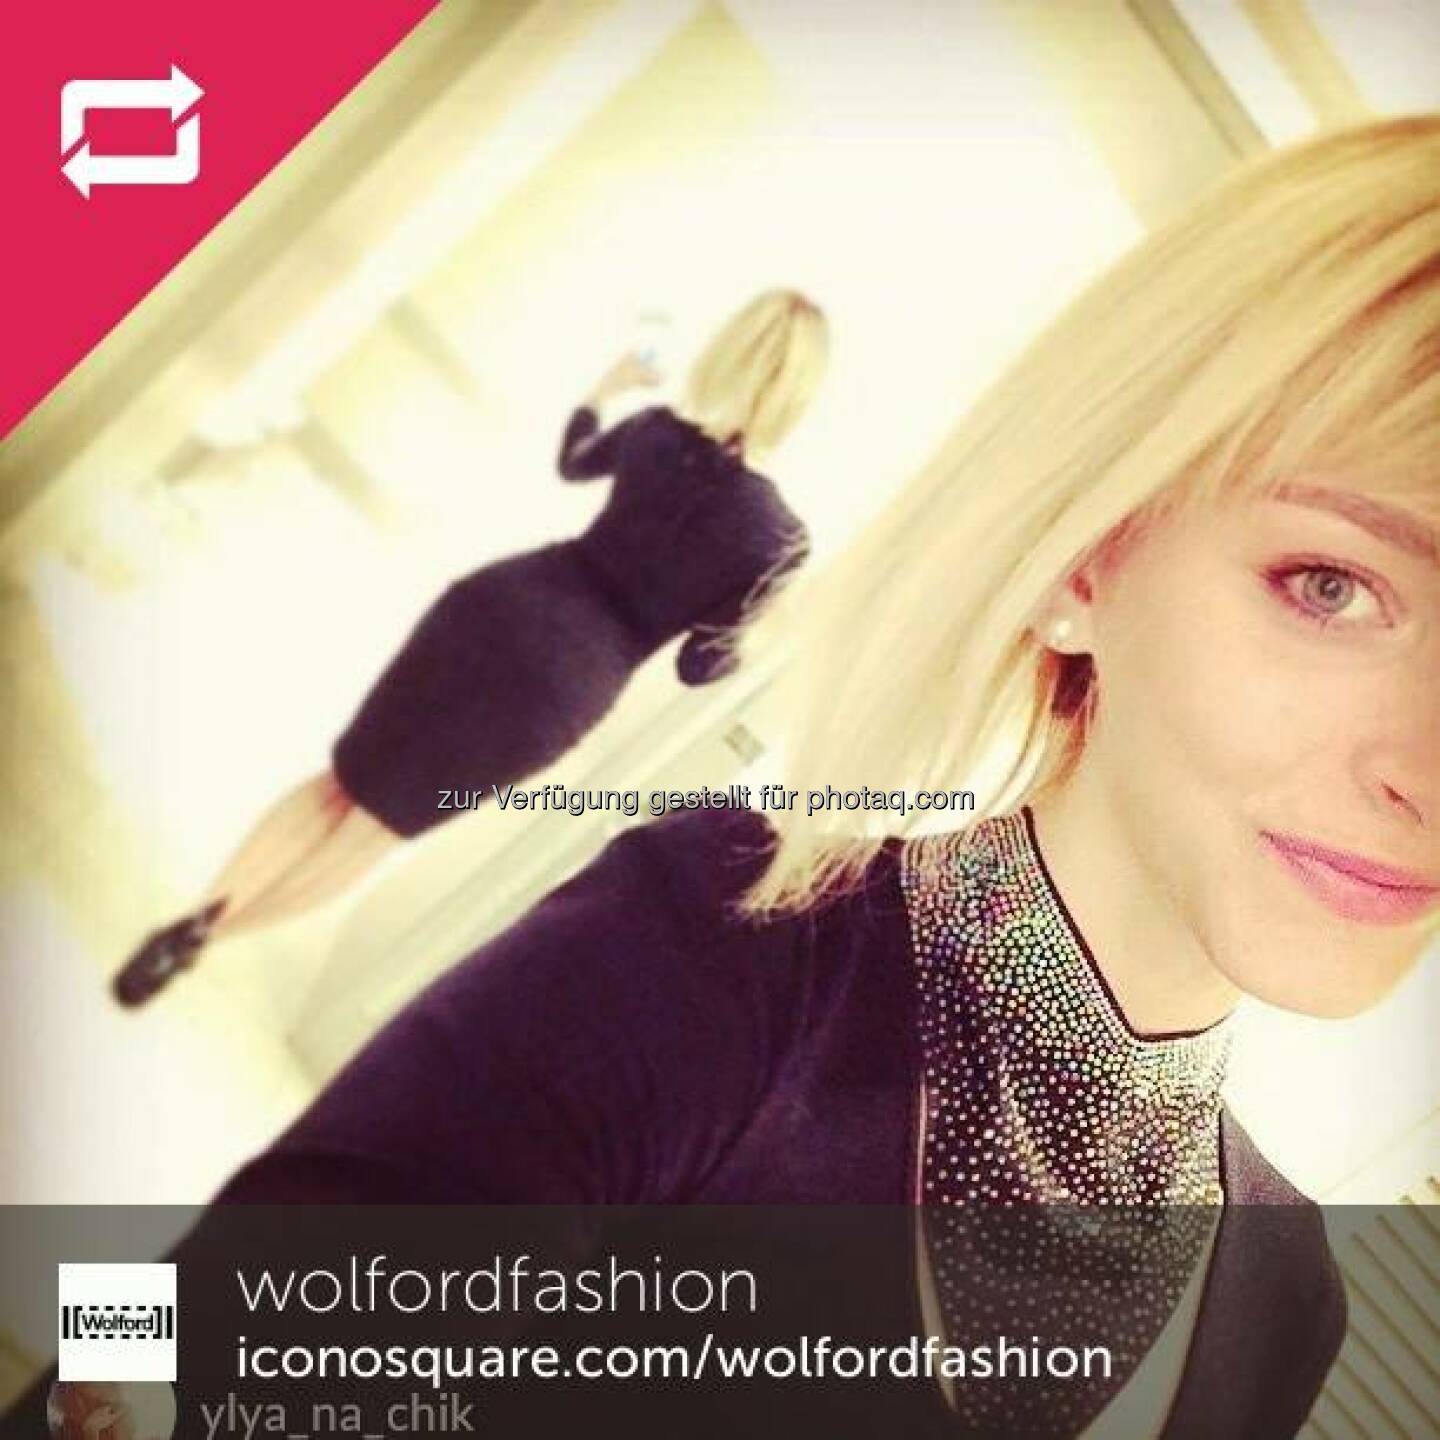 We are immensely grateful to all the great women who wear Wolford, work for Wolford, or just follow Wolford on social media. Thank you!  Source: http://facebook.com/WolfordFashion